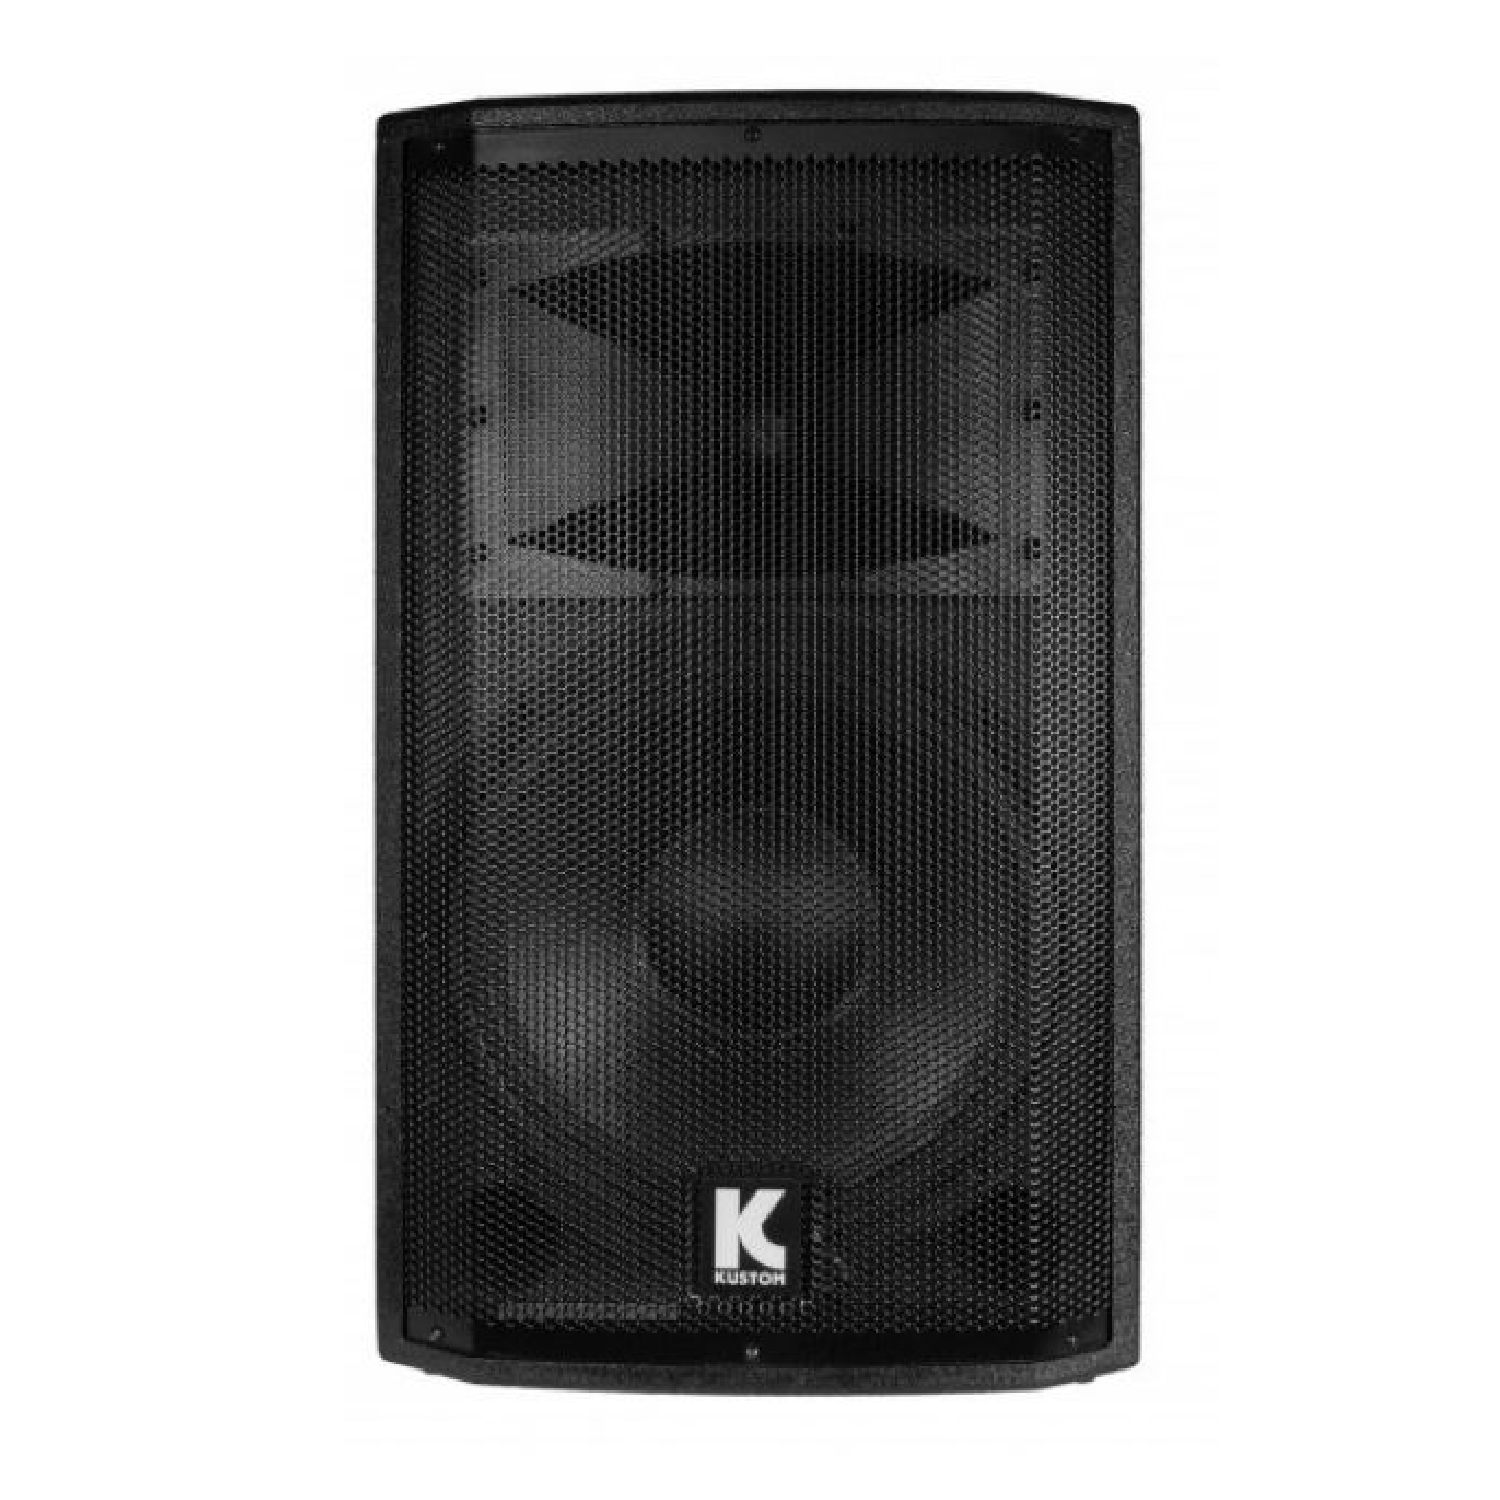 3 Channels Output Power 1000W Peak 12 Inches Speaker Horn Type HF Compression Driver with Bluetooth   HIPAC 12 PRO kustom